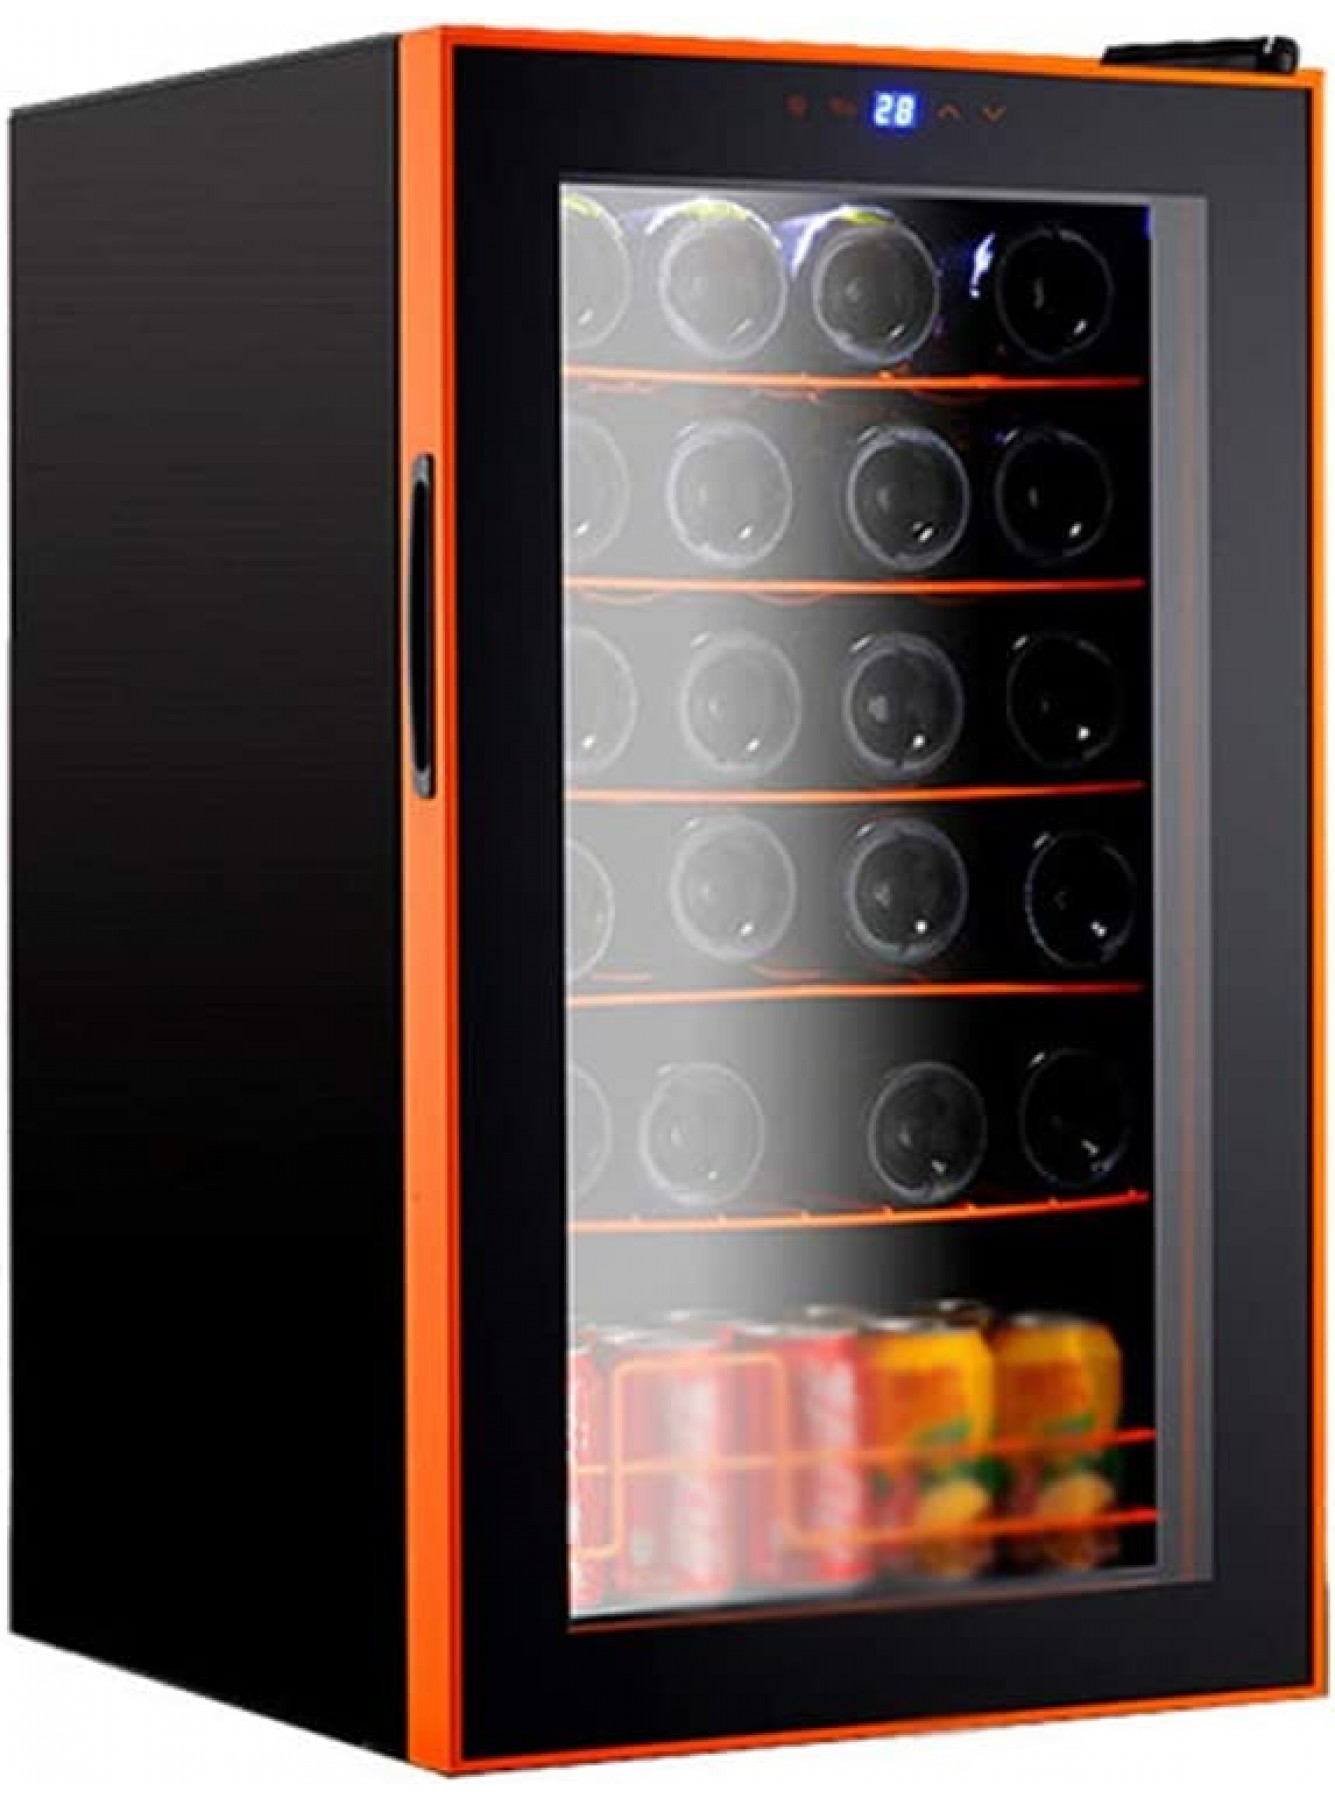 hanzeni Wine Cooler Dual Zone Wine and Beverage Cooler,Quick and Silent Cooling System Freestanding Small Red & White Wine Enthusiast Wine Cooler B08GYL54ZR